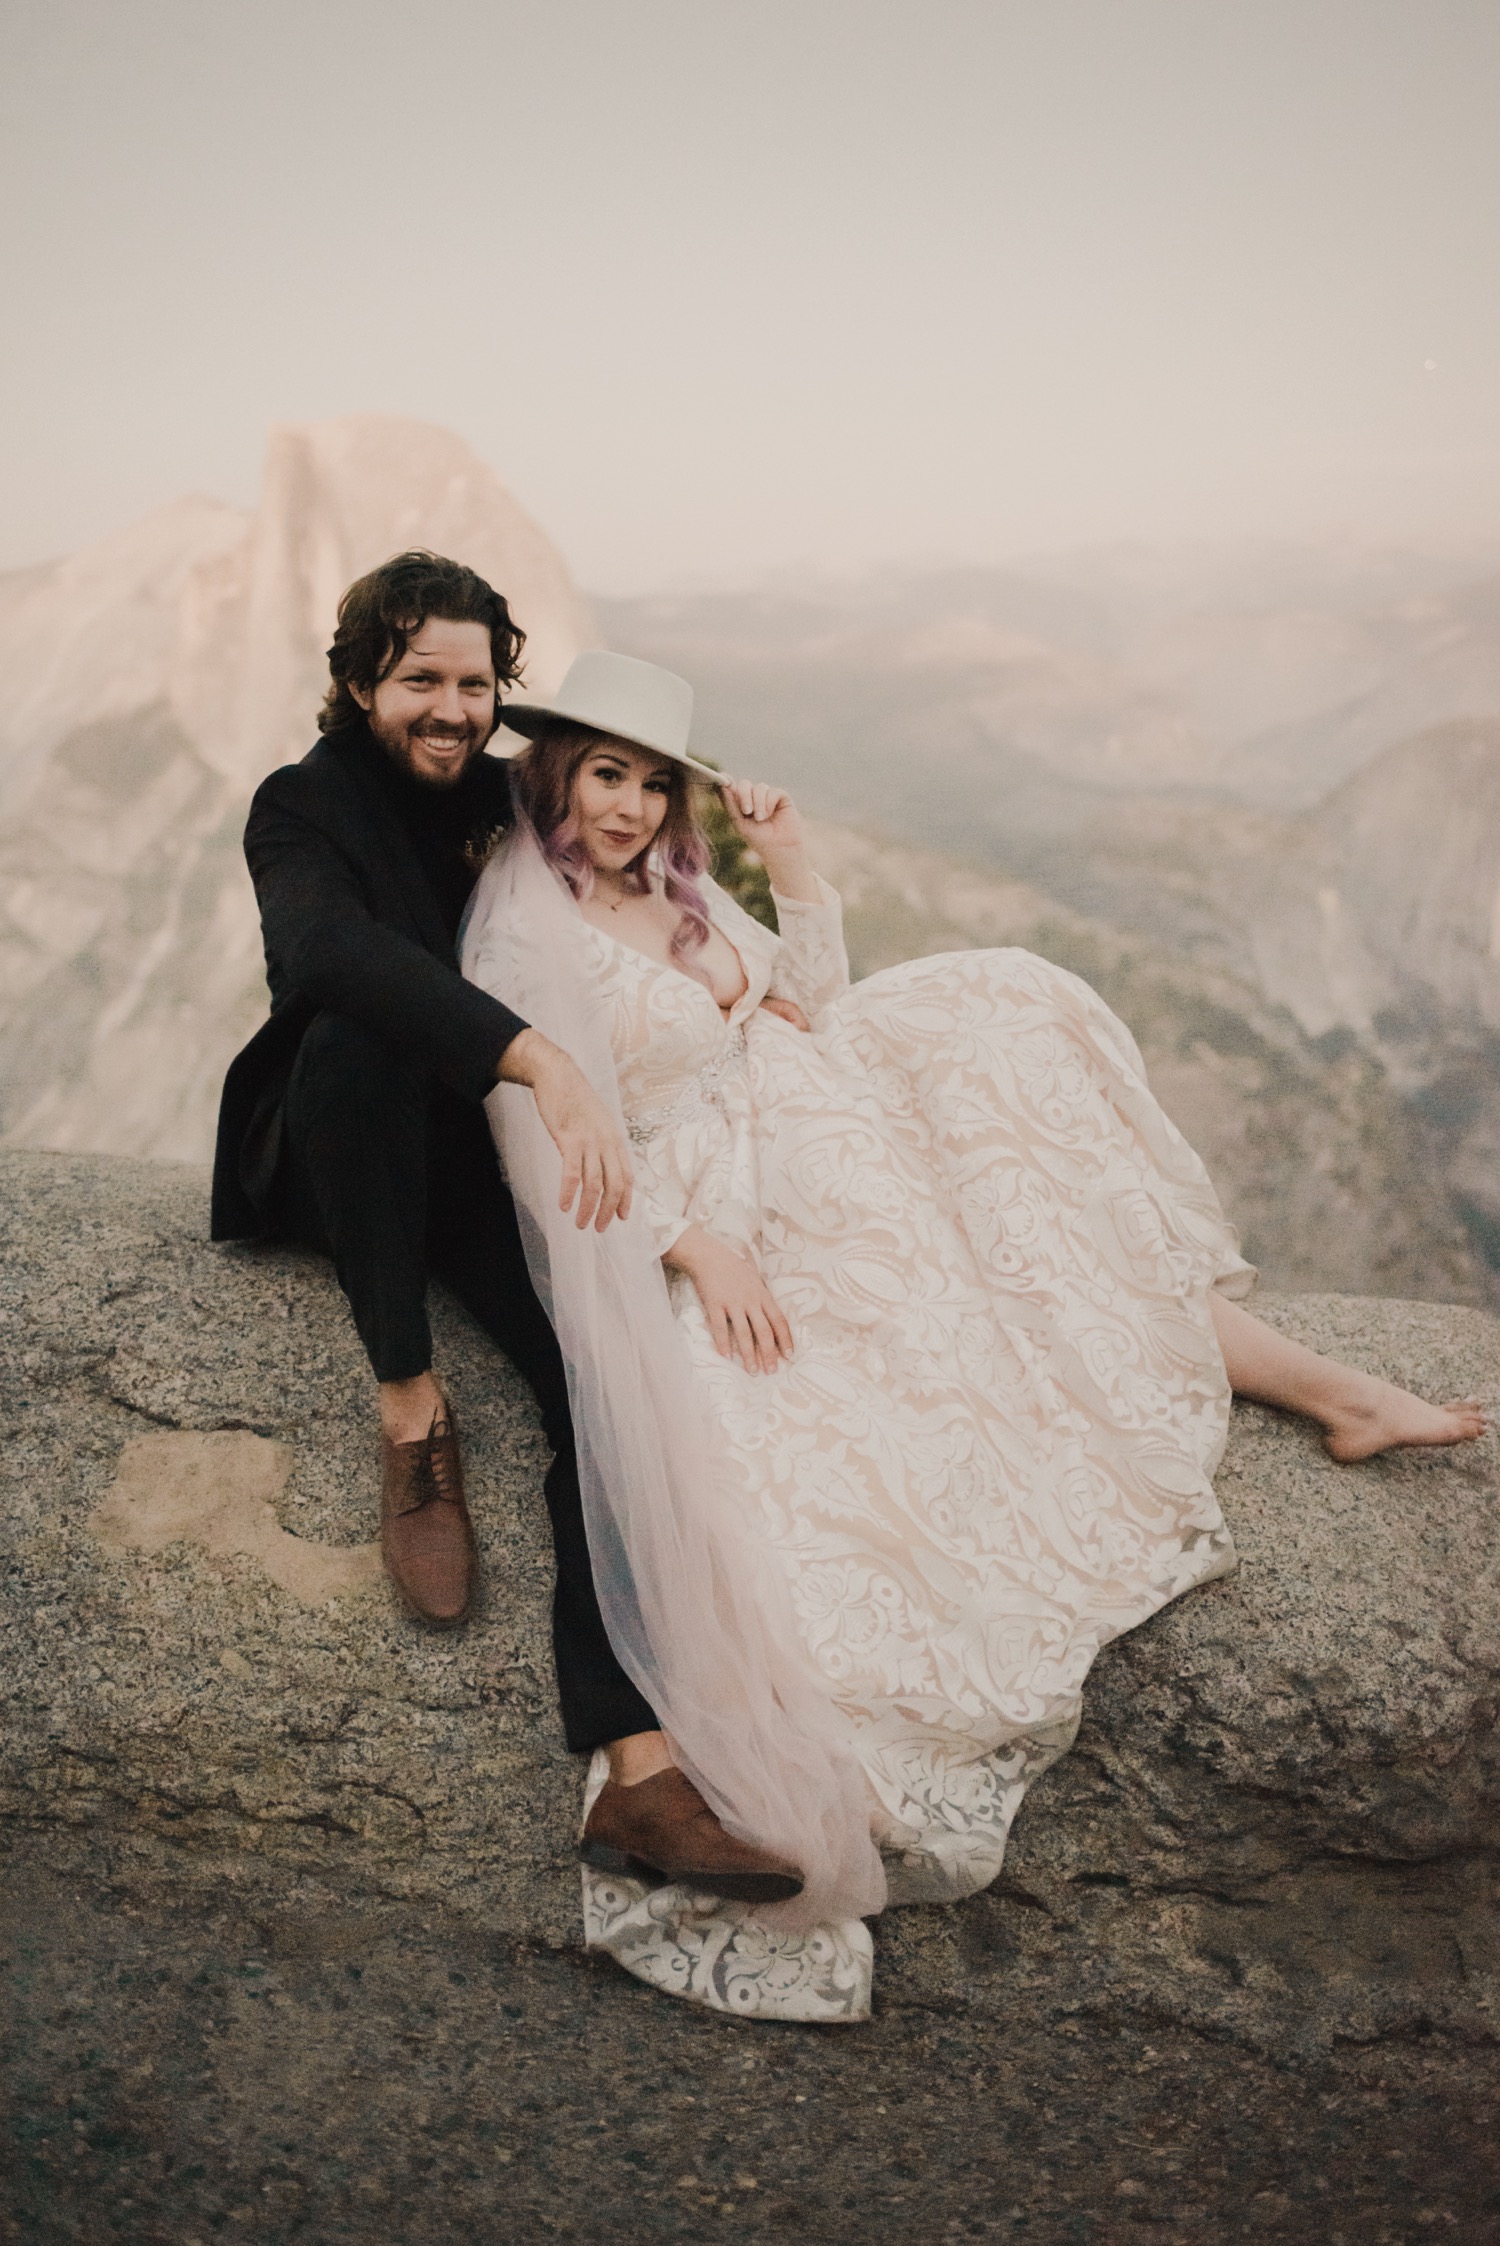 https://content1.getnarrativeapp.com/static/48e8bb68-8622-46cd-96d6-dfb3f5e302ac/bride-with-purple-hair-in-hat-and-pink-veil-eloping-at-Yosemite-National-Park.jpg?w=1500